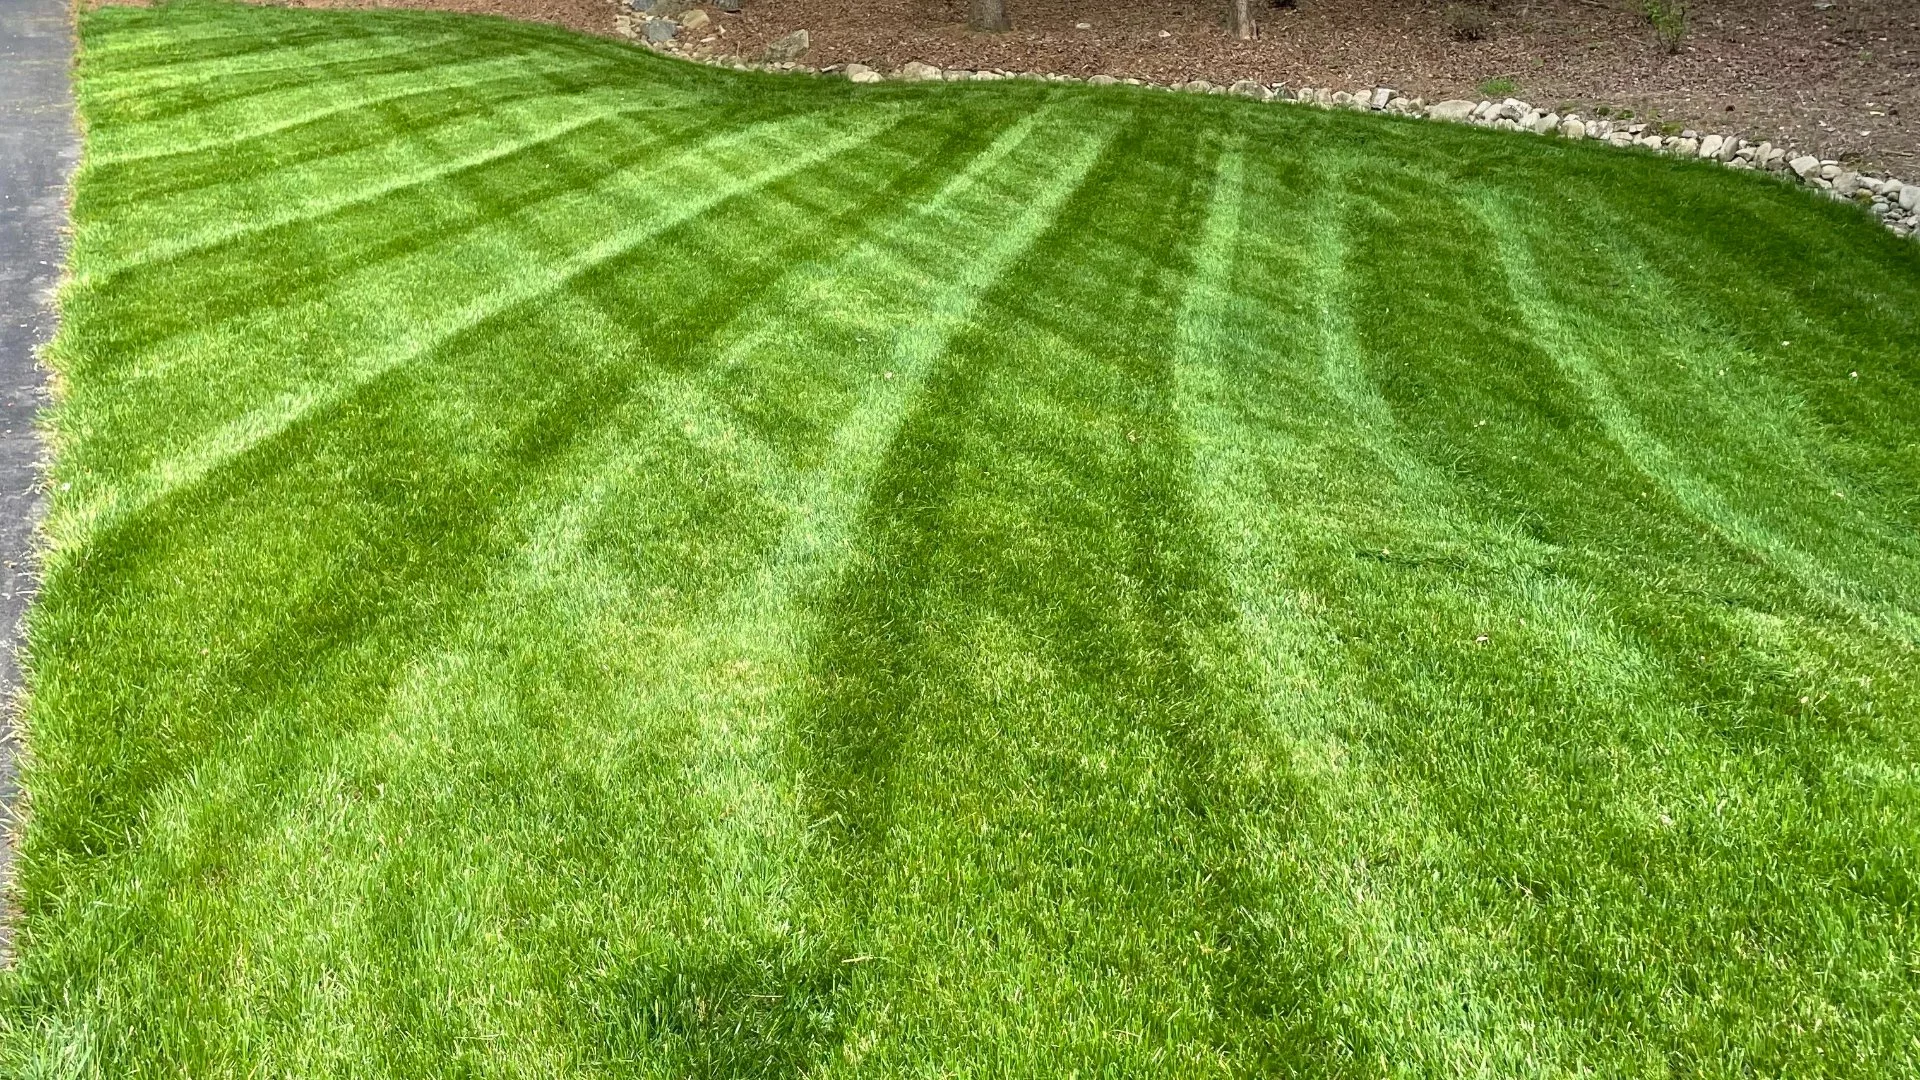 Fertilization & Weed Control & Lime! Fall Lawn Care For Fescue Grasses